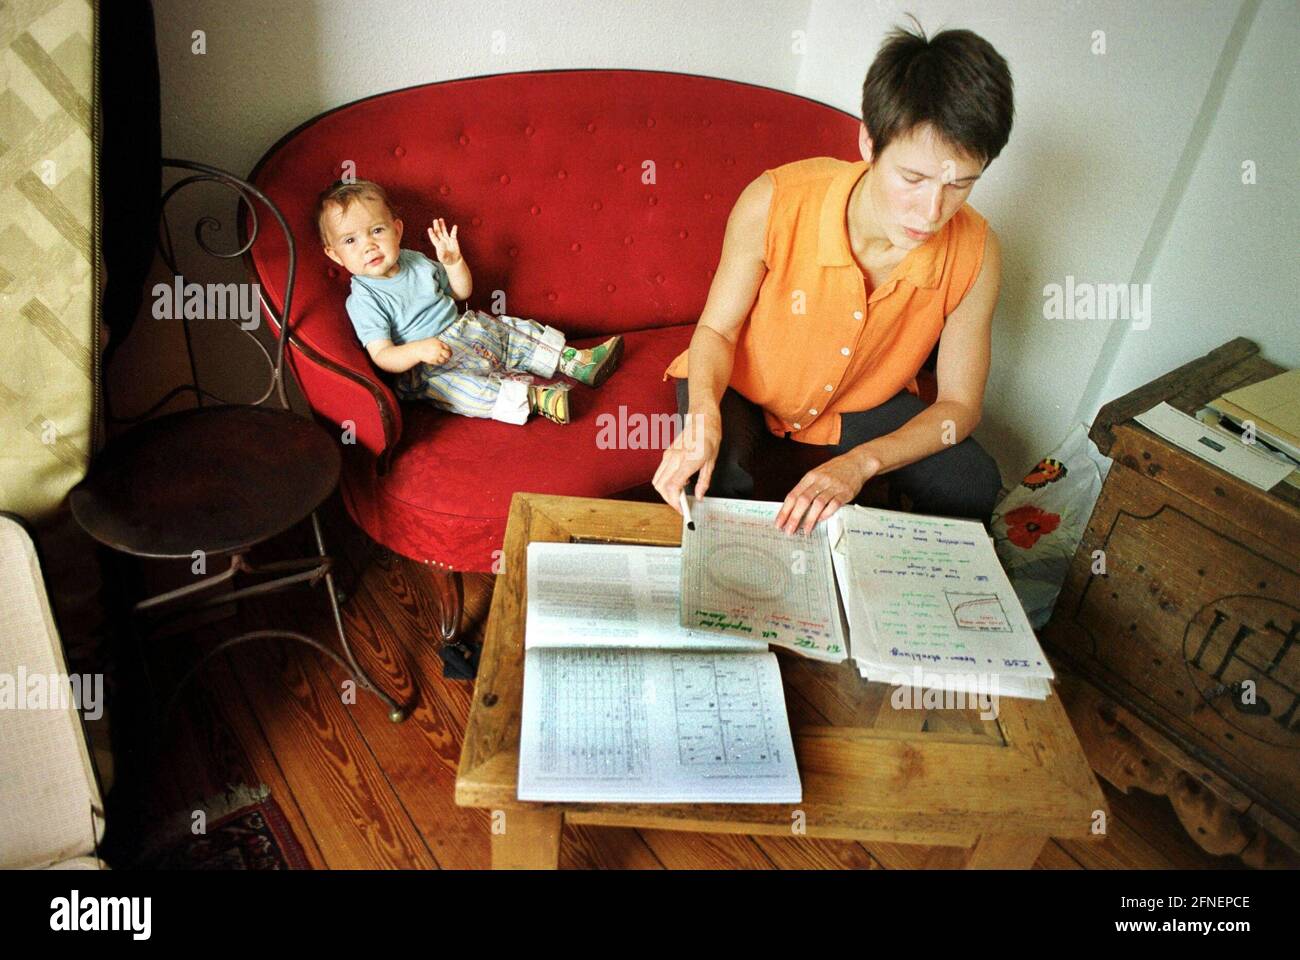 SILKE PETZOLD, prospective professor, currently in London with her husband and child, here still in her Hamburg flat doing scientific work. July 1999 [automated translation] Stock Photo